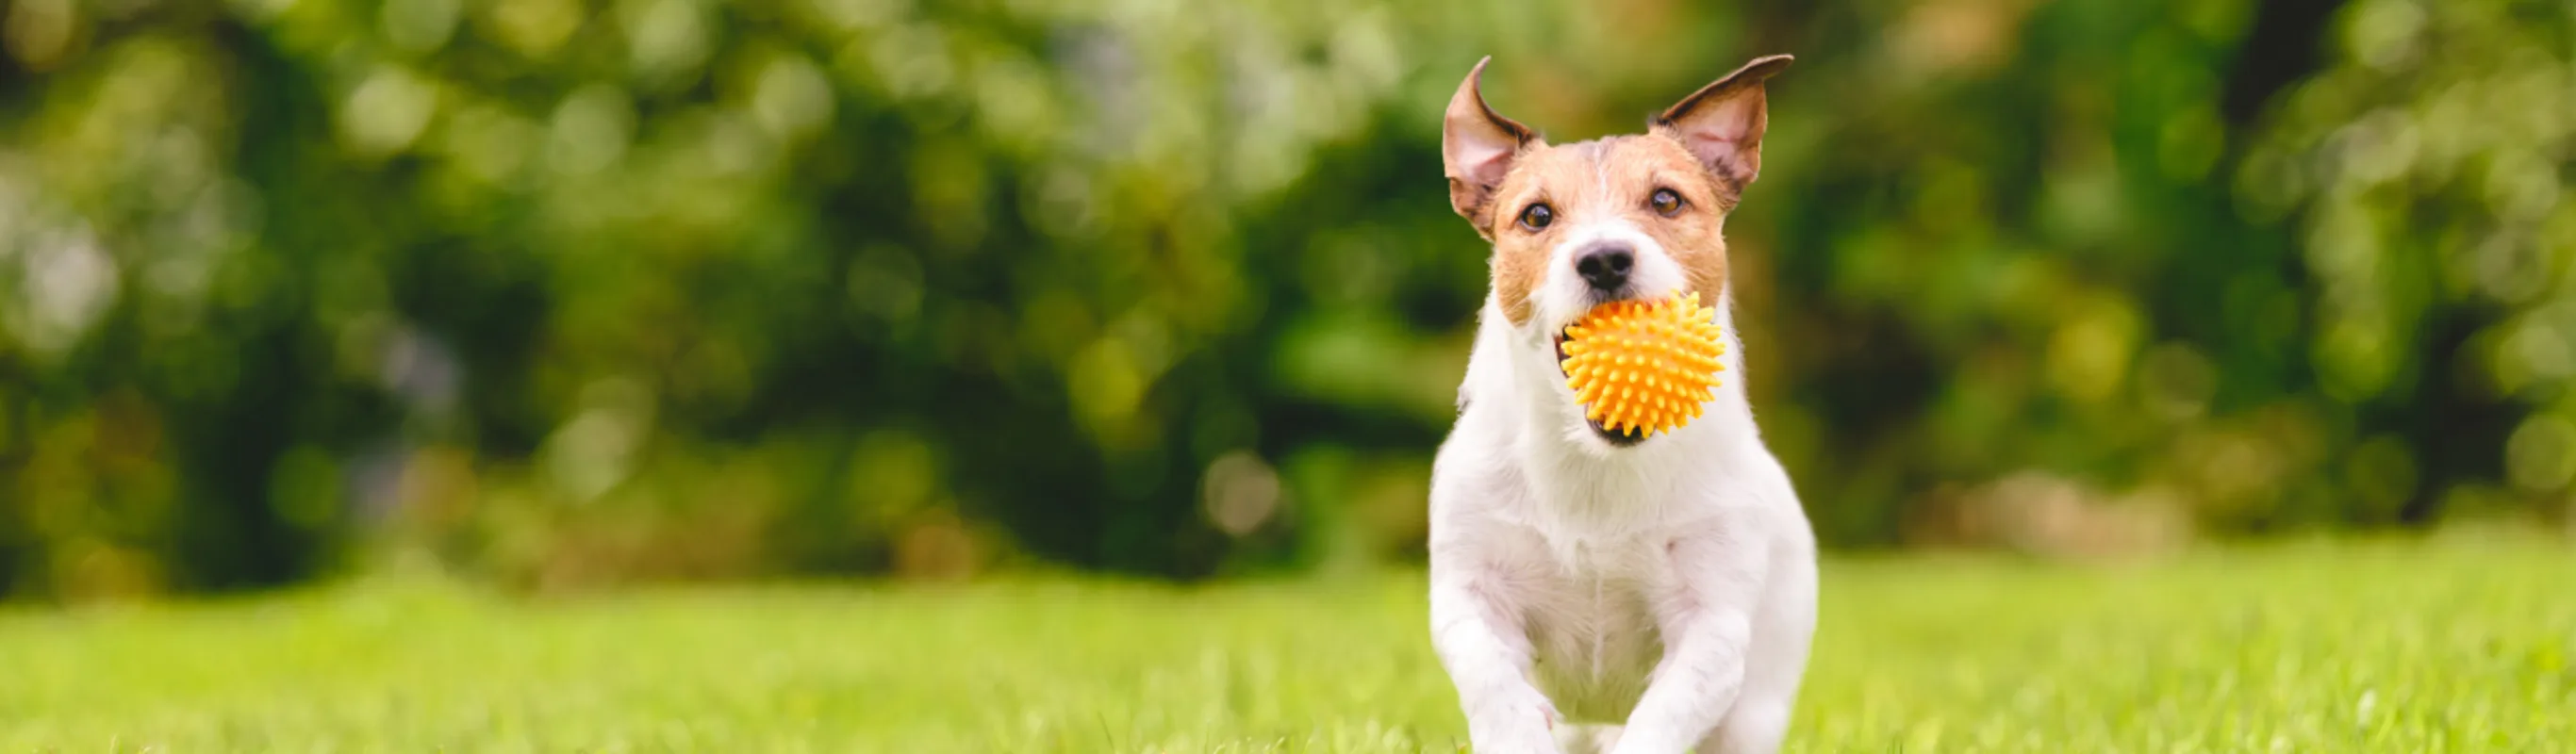 Small white dog running through grass with an orange chew toy in its mouth